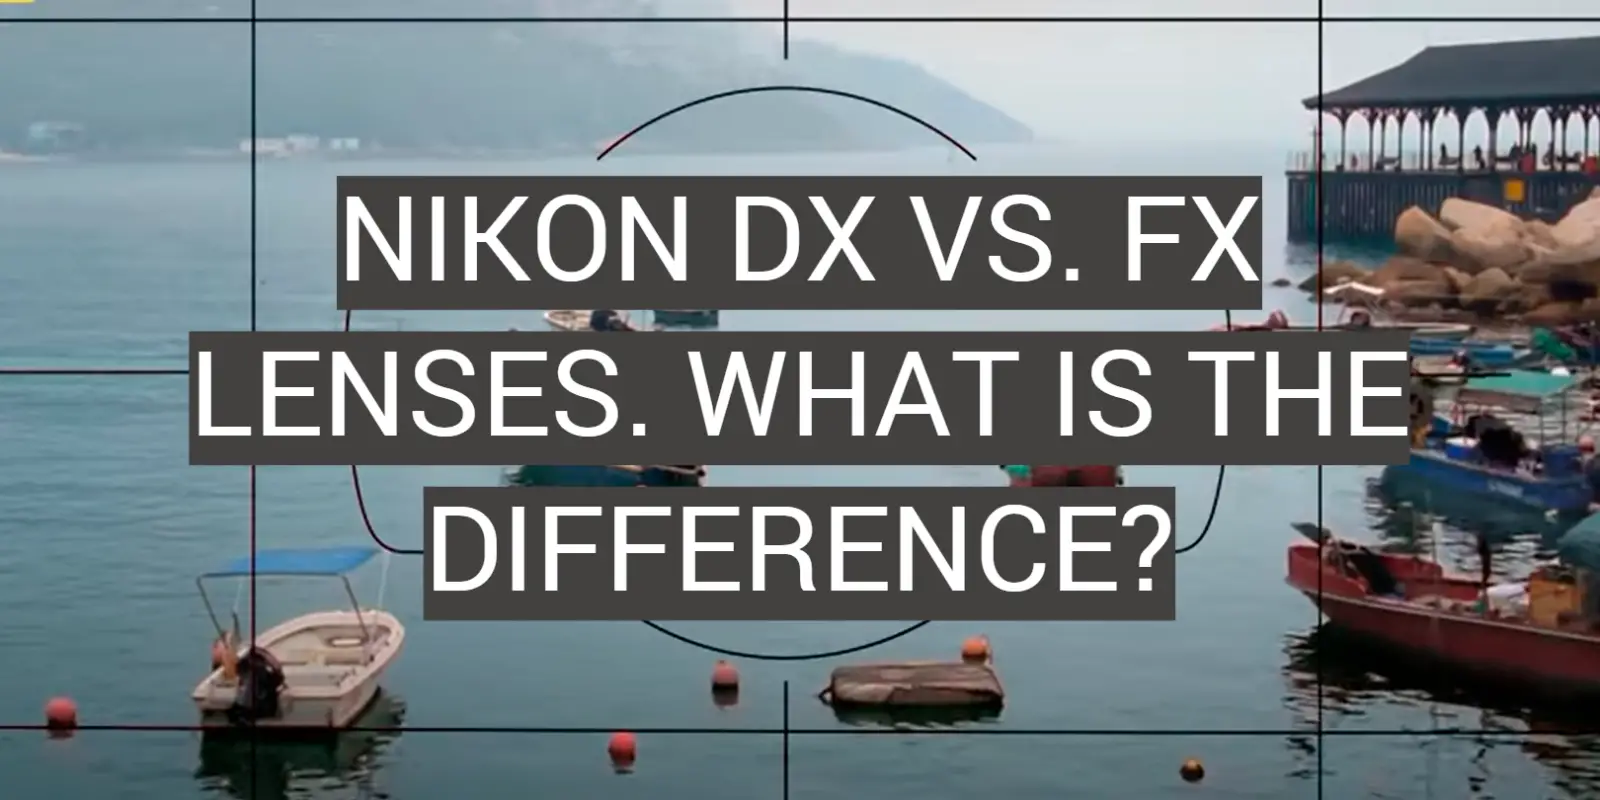 Nikon DX vs. FX Lenses. What is the Difference?